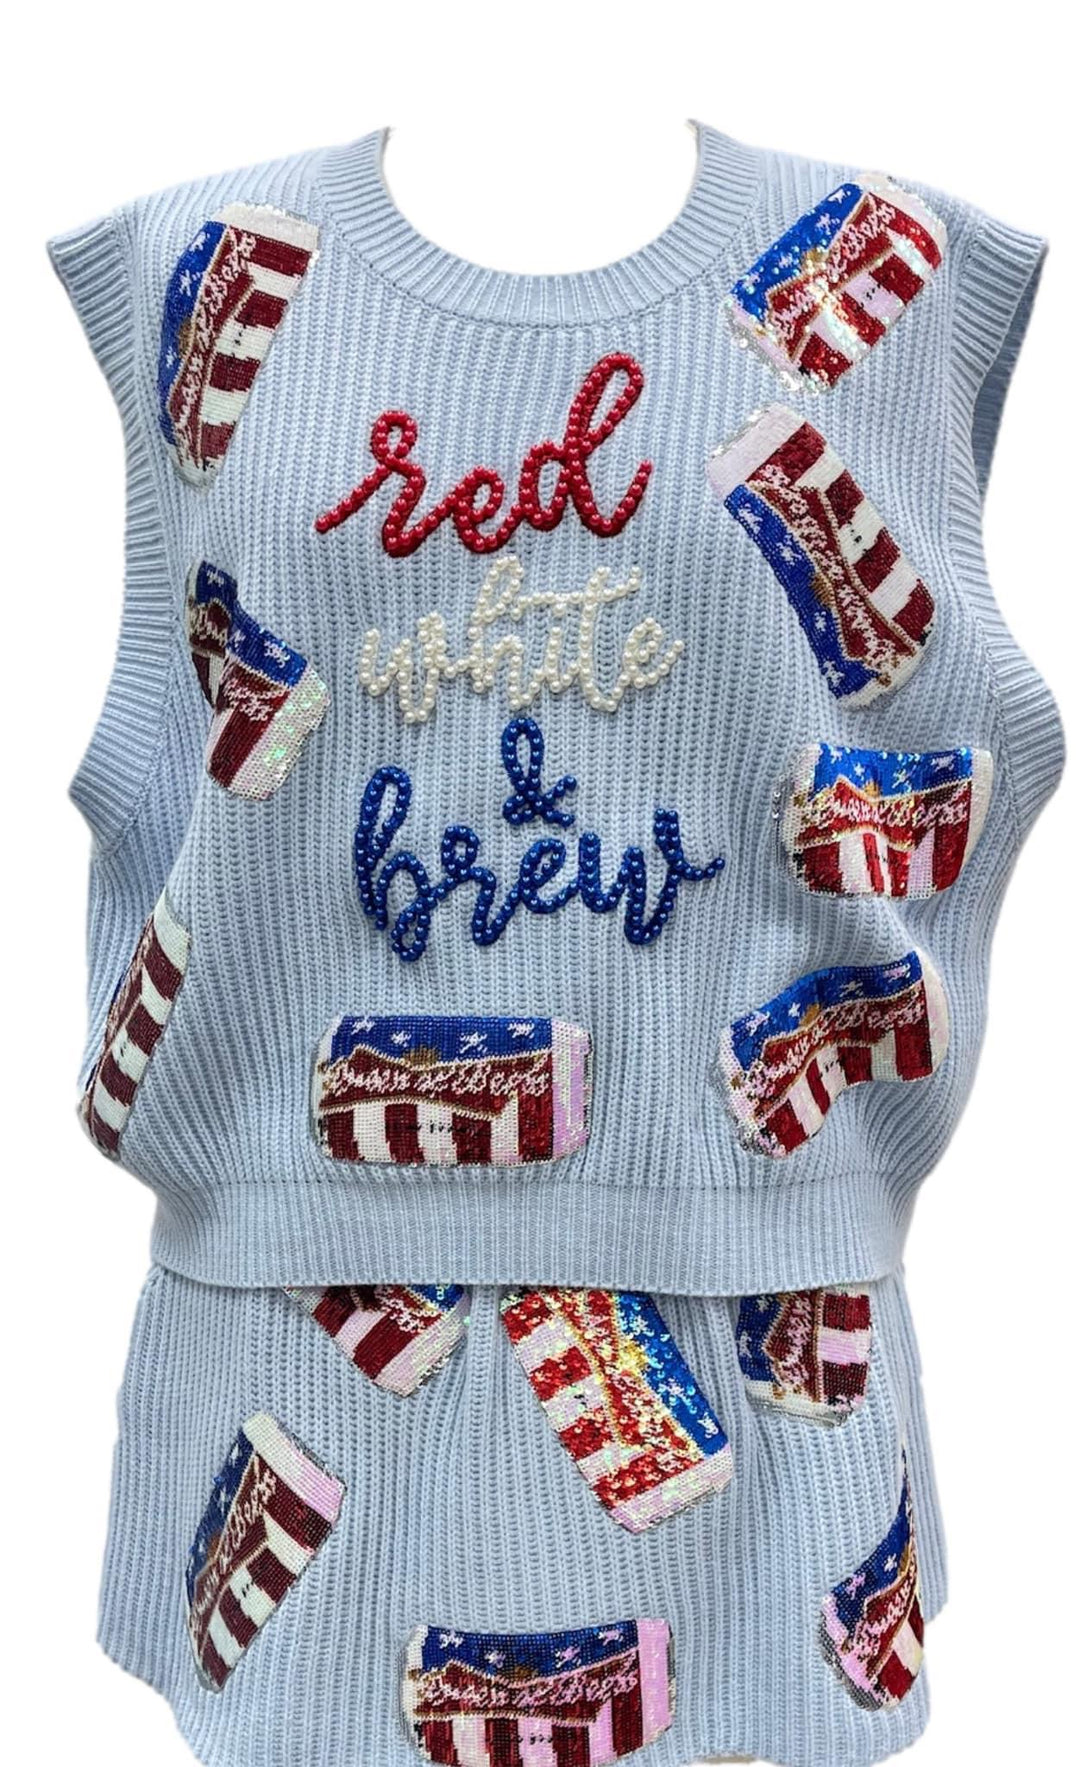 Light Blue 'Red, White, & Brew' Queen Of Sparkles Sweater Vest-Short Sleeves-Queen Of Sparkles-Shop with Bloom West Boutique, Women's Fashion Boutique, Located in Houma, Louisiana